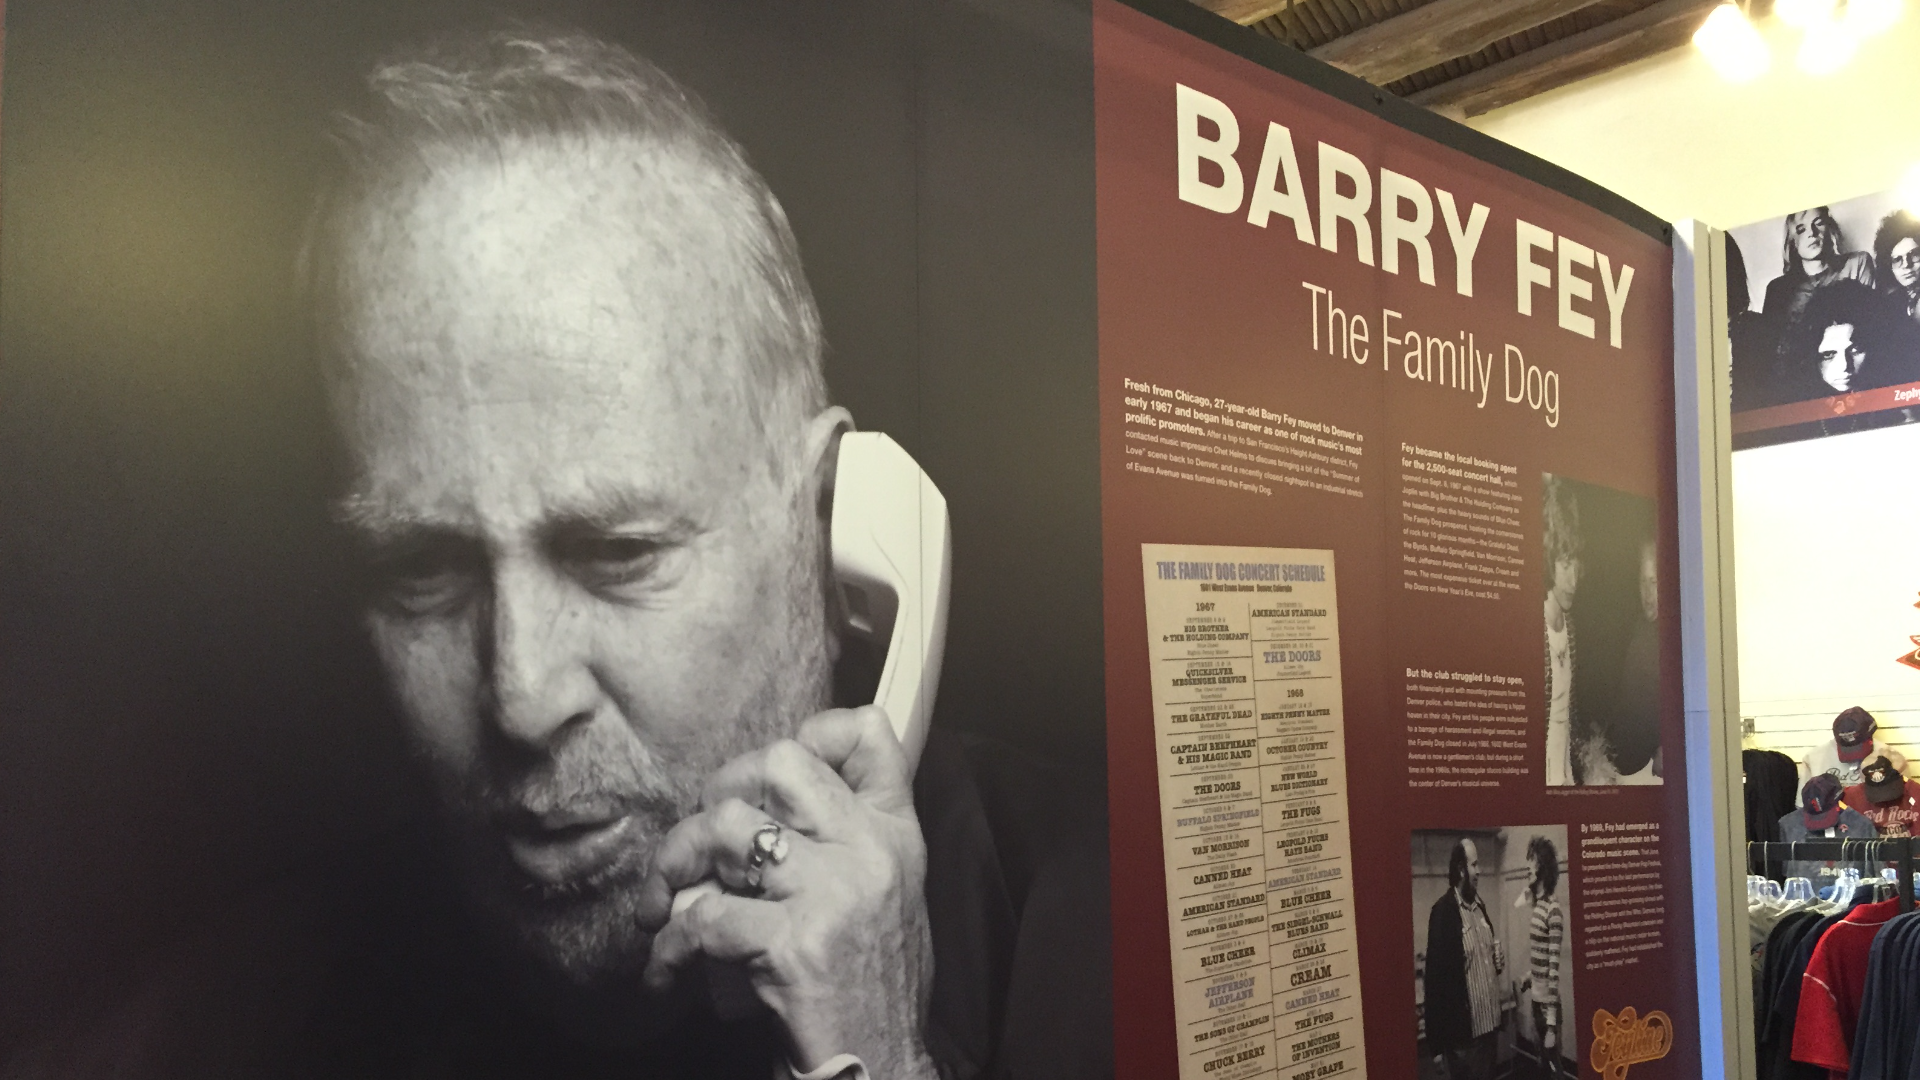 Barry Fey was an iconic concert promoter who worked with some of the biggest names in the industry.